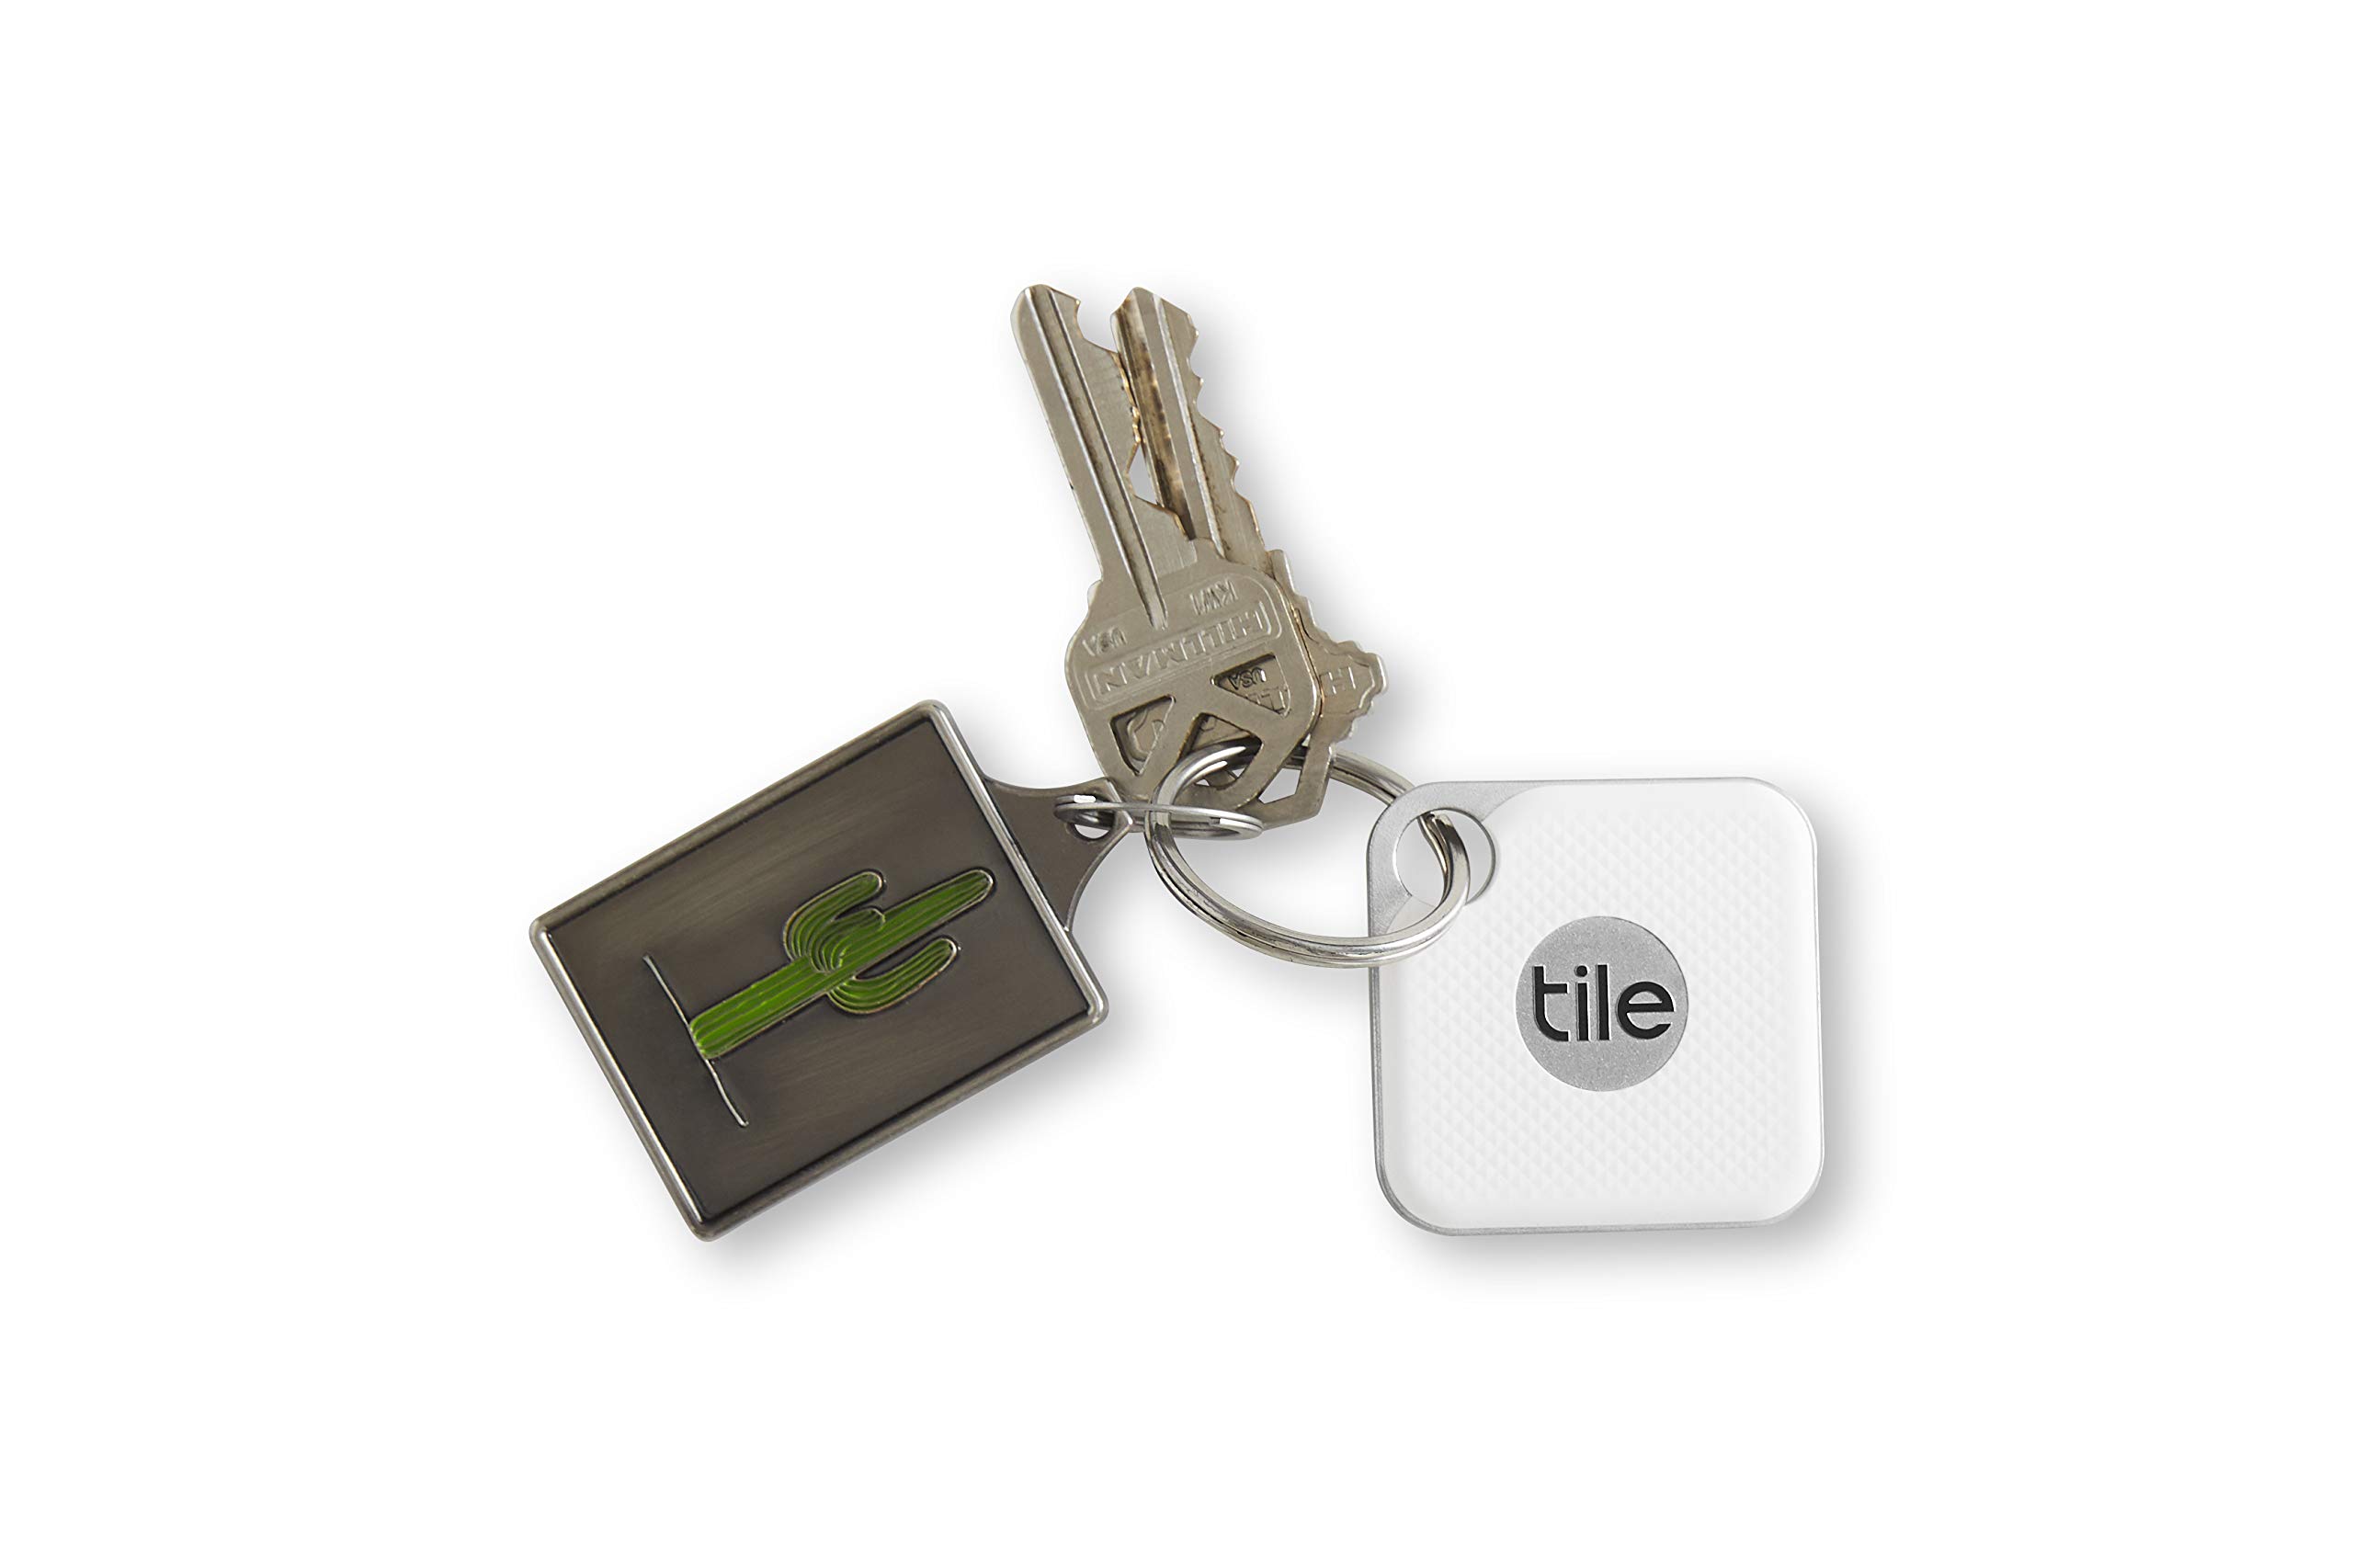 Tile Inc., Pro Black and White Combo, Bluetooth Tracker and Finder, Water Resistant, Replaceable Battery, Easy to Attach for Keys, Pet Collars and Bags (4 Pack), combo - black & white (EC-18004)